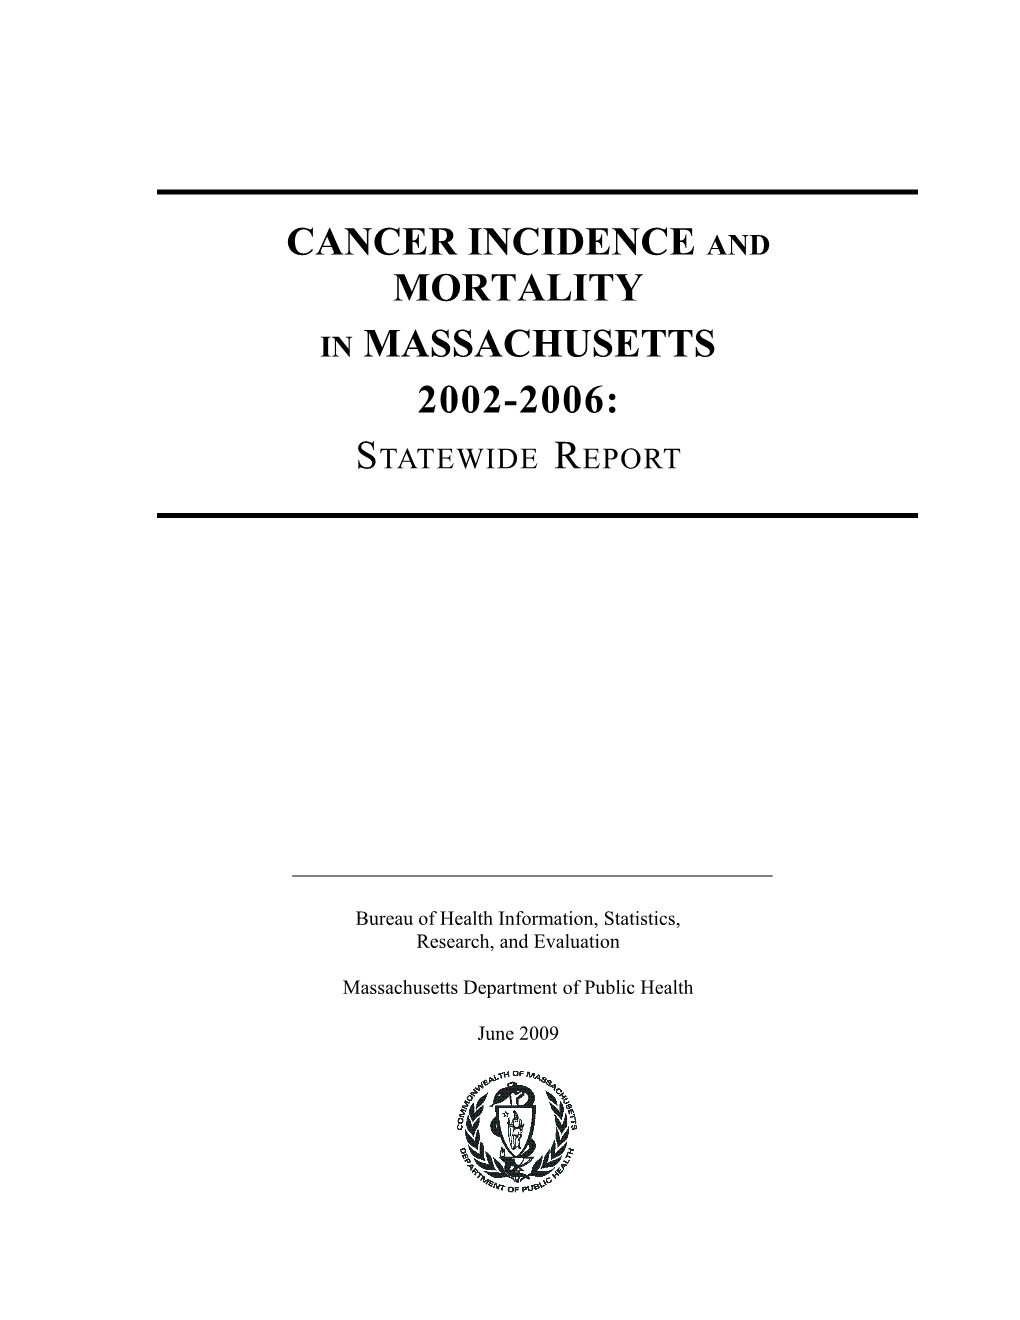 Distribution of Cancer Incidence by Cancer Type and Sex